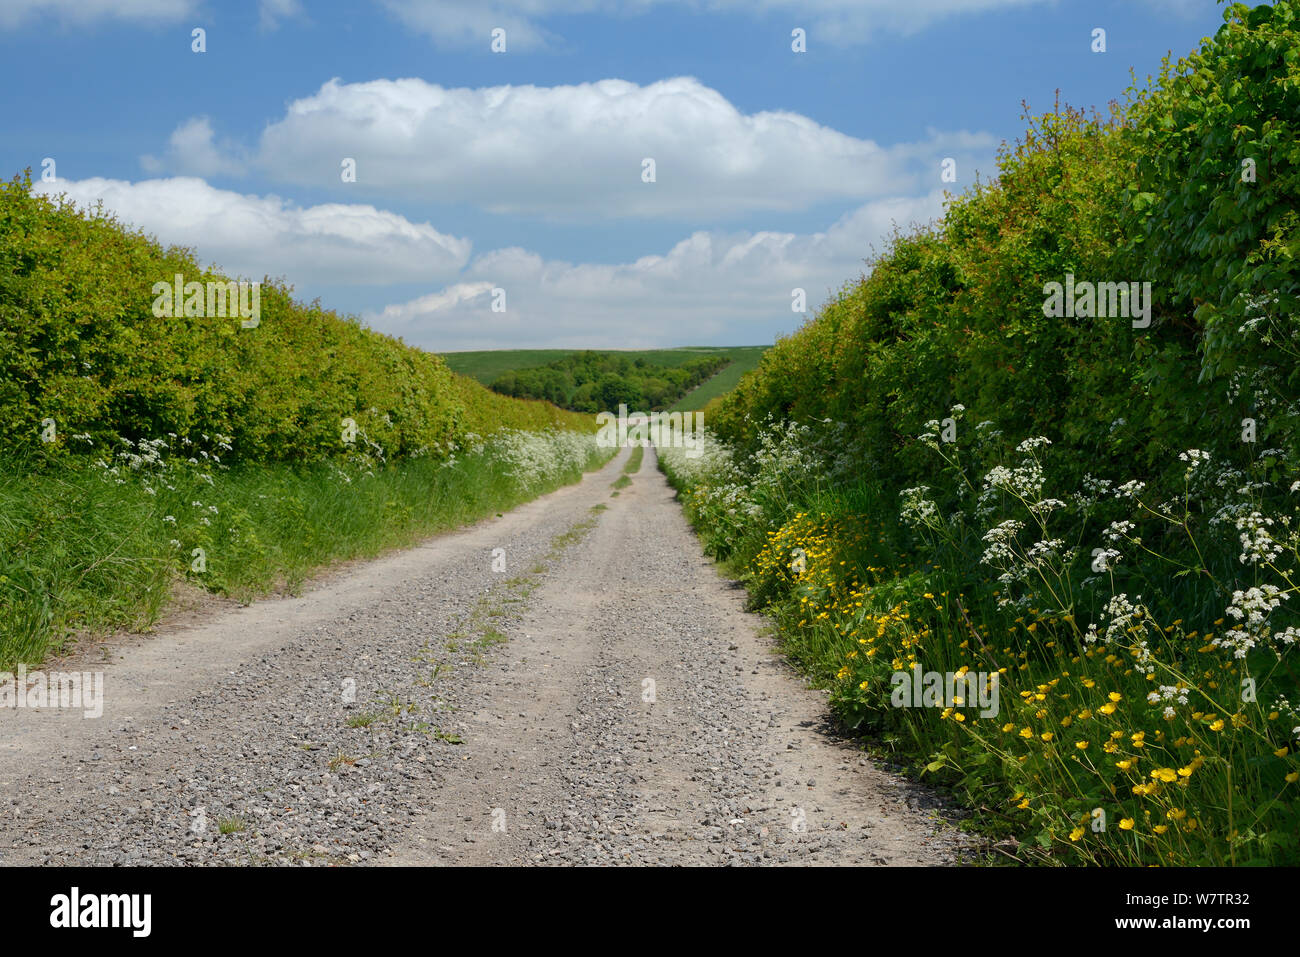 Farm track leading to The Ridgeway with Cow parsley (Anthriscus sylvestris) and Buttercups (Ranunculus acris) flowering on the verges, Berwick Basset, Marlborough Downs, Wiltshire, UK, June. Stock Photo